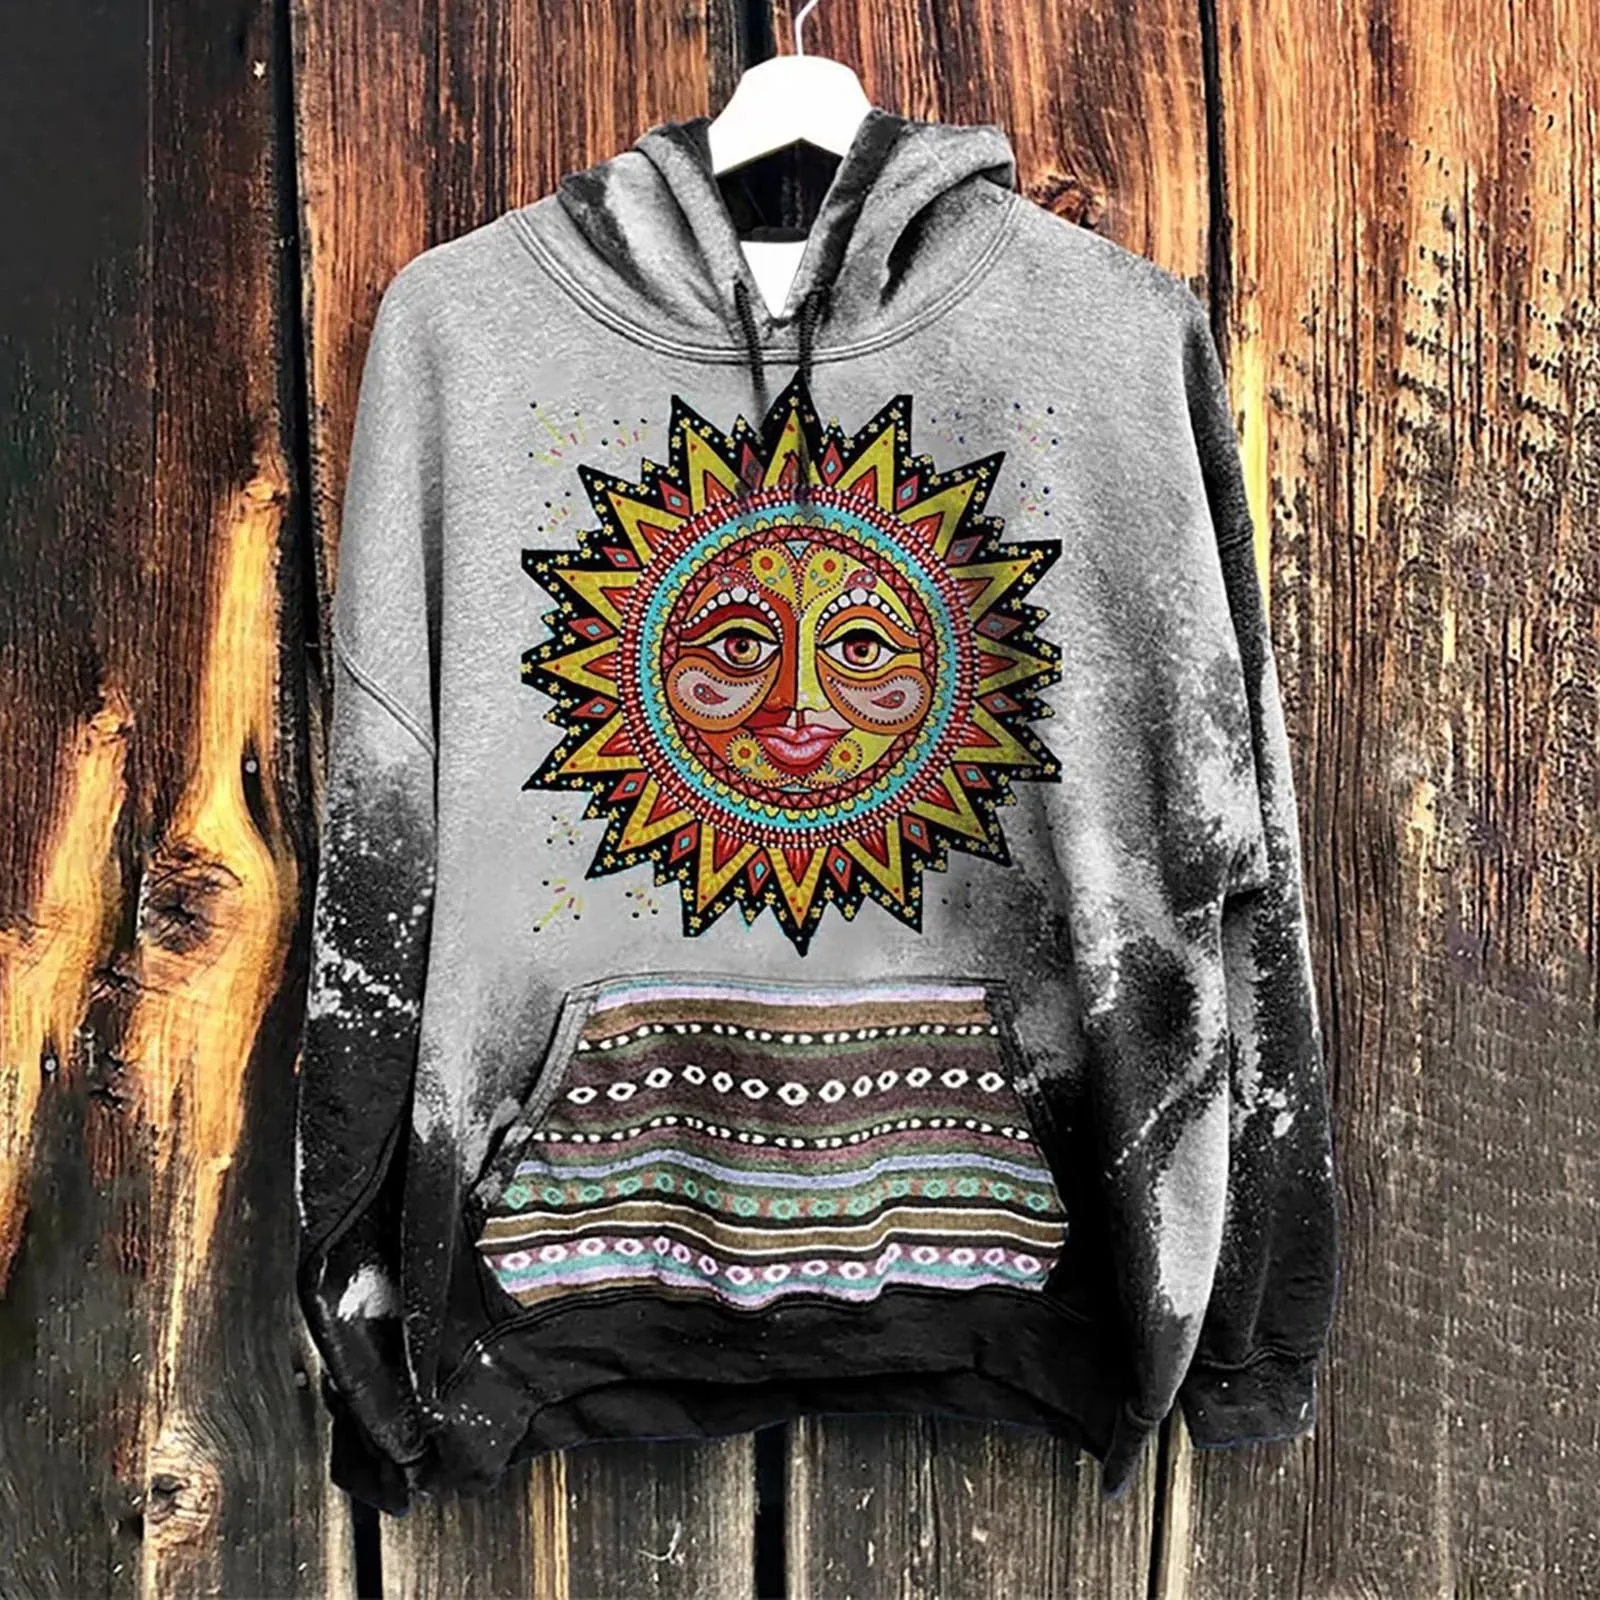 

Novelty Aesthetic Printed Women's Hoodies Winter Fall asual Long Sleeve Hooded Sweatshirts Pullovers Grunge Clothes Sudadera A40